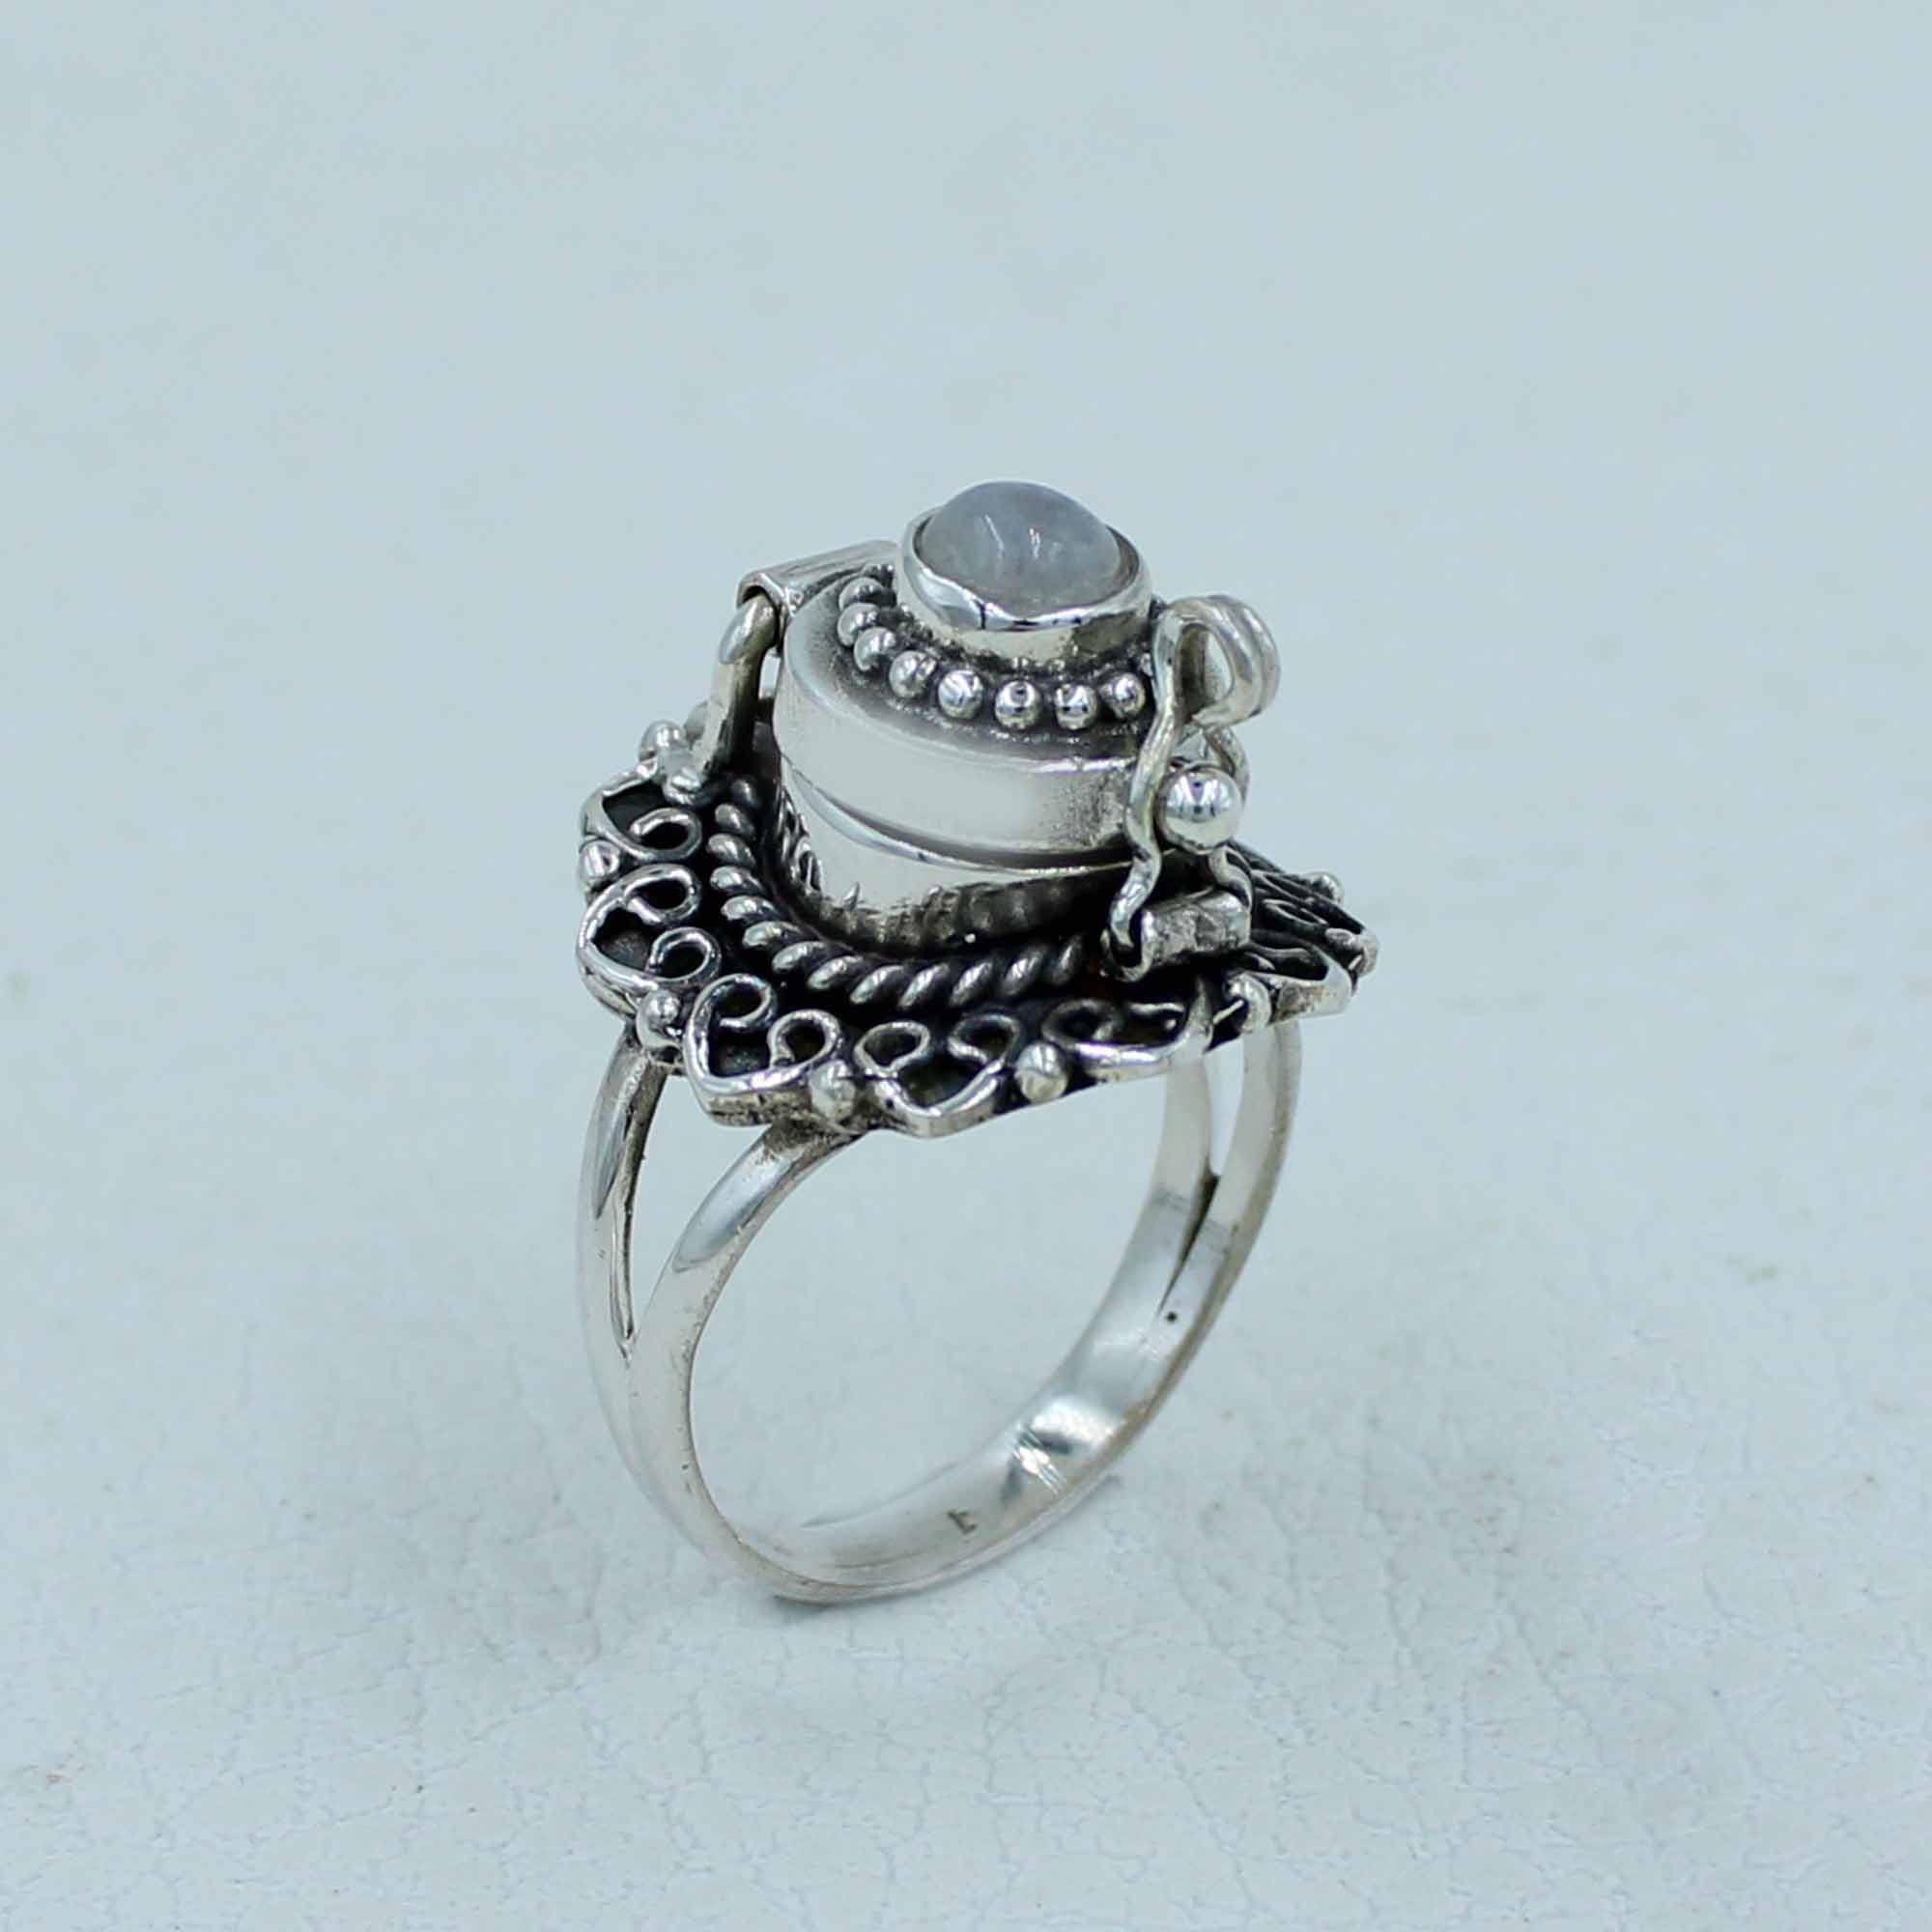 Moonstone Poison Box Silver Ring